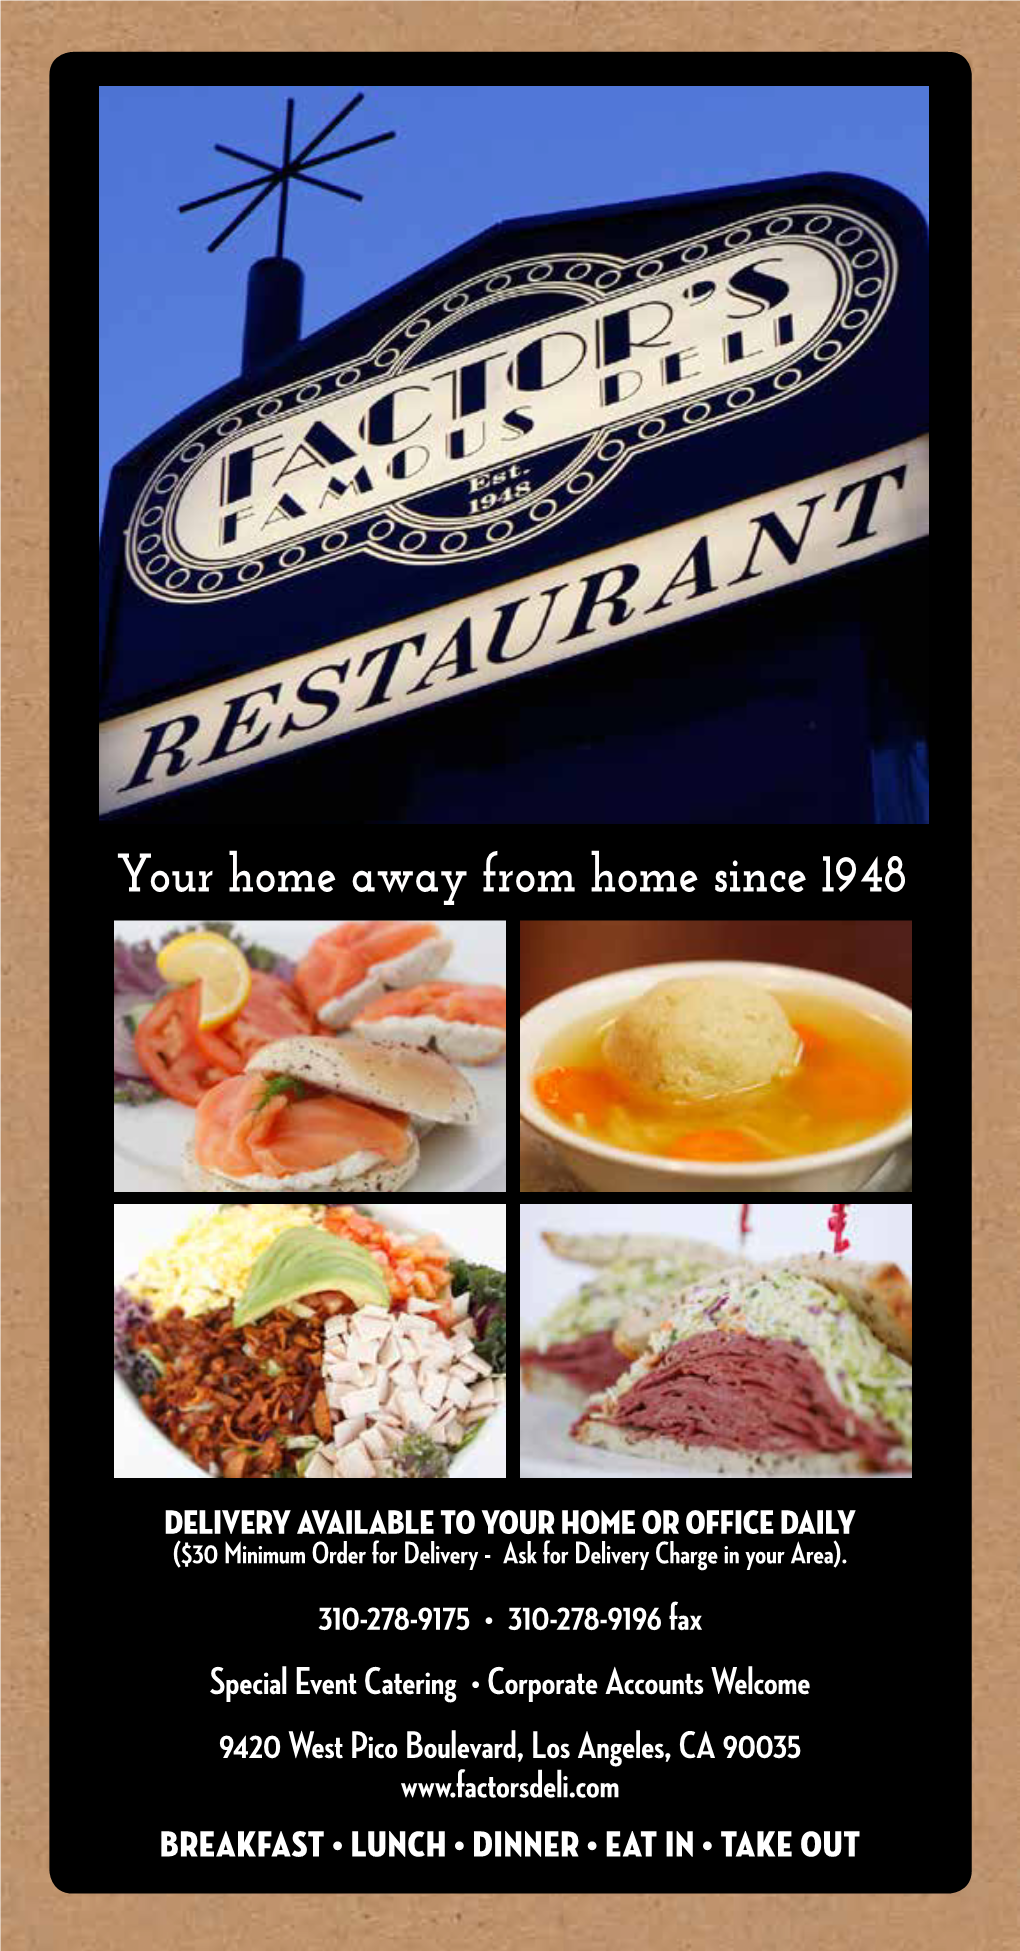 Your Home Away from Home Since 1948